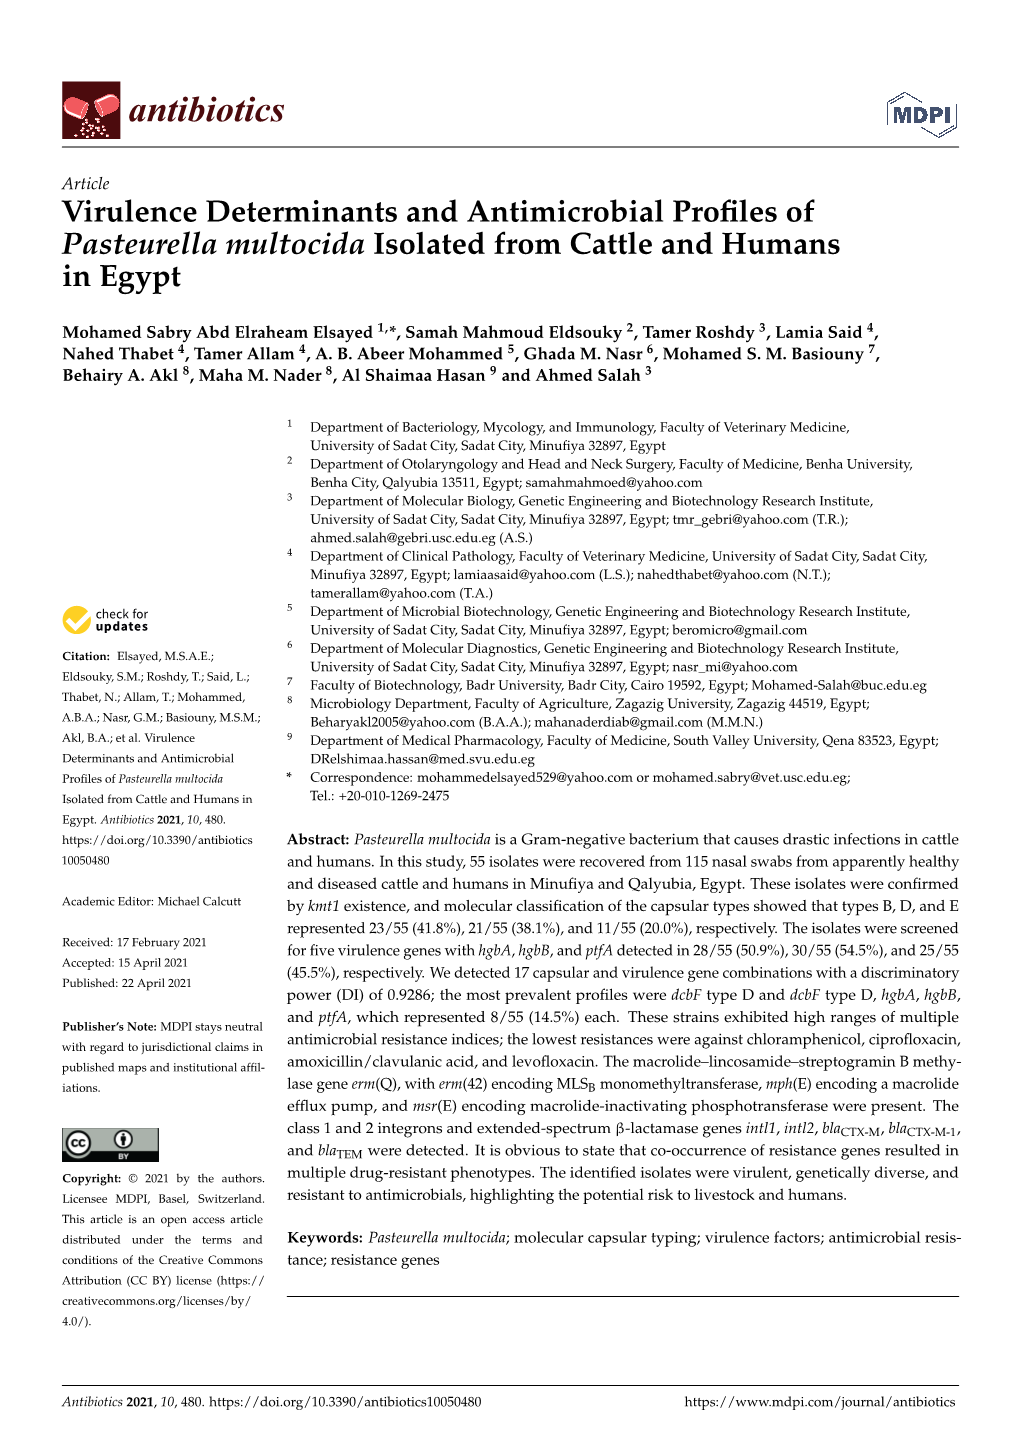 Virulence Determinants and Antimicrobial Profiles of Pasteurella Multocida Isolated from Cattle and Humans in Egypt